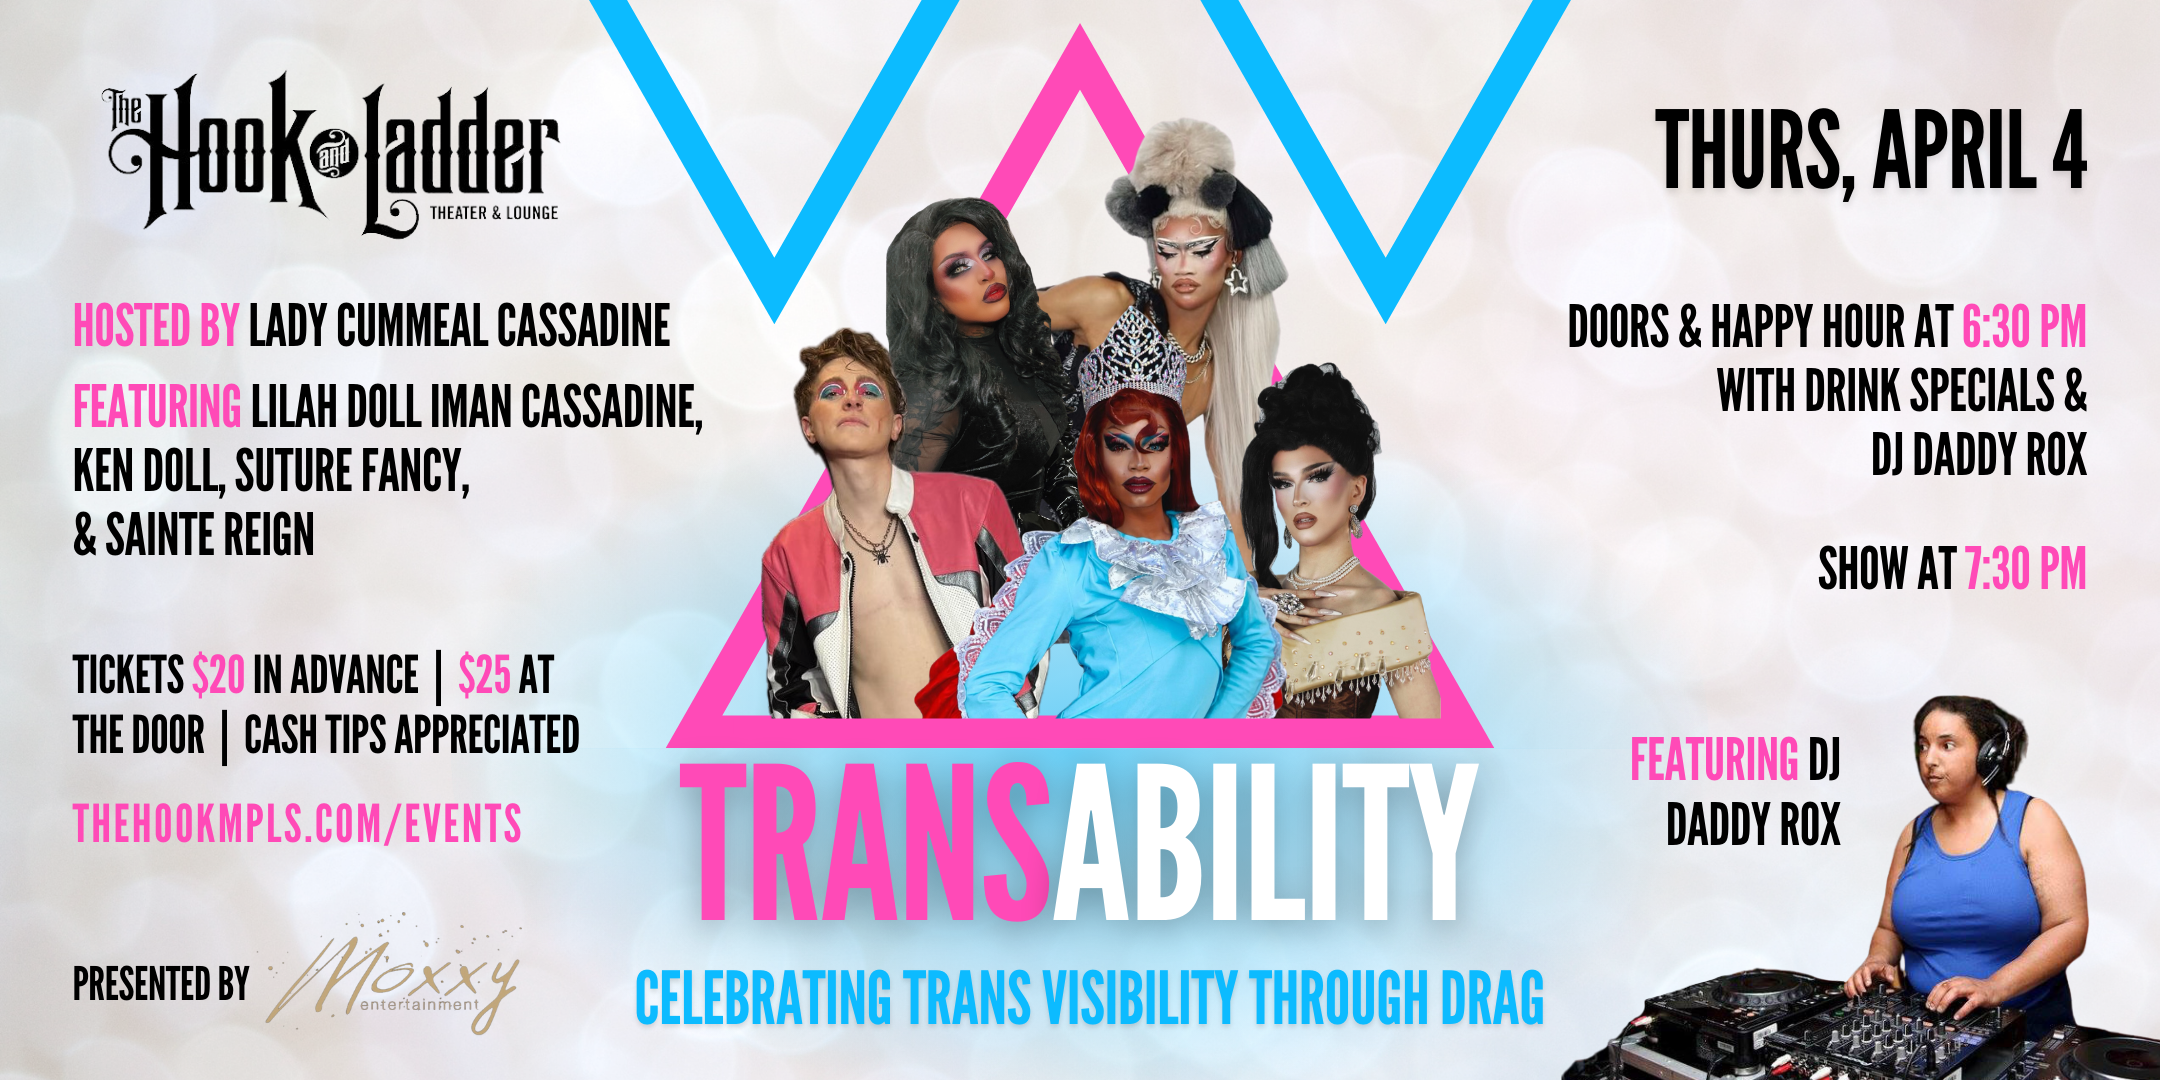 Presented by Moxxy Entertainment TransAbility Celebrating Trans Visibility Through Drag Featuring Lilah Doll Iman Cassadine, Ken Doll, Suture Fancy, & Sainte Reign Hosted by Lady Cummeal Cassadine Featuring DJ Daddy Rox Thursday, April 4 The Hook and Ladder Theater Doors/ Drinks/DJ 6:30pm :: Show 7:30pm :: 21+ General Admission*: $20 Advance / $25 Day of Show Cash Tips Appreciated